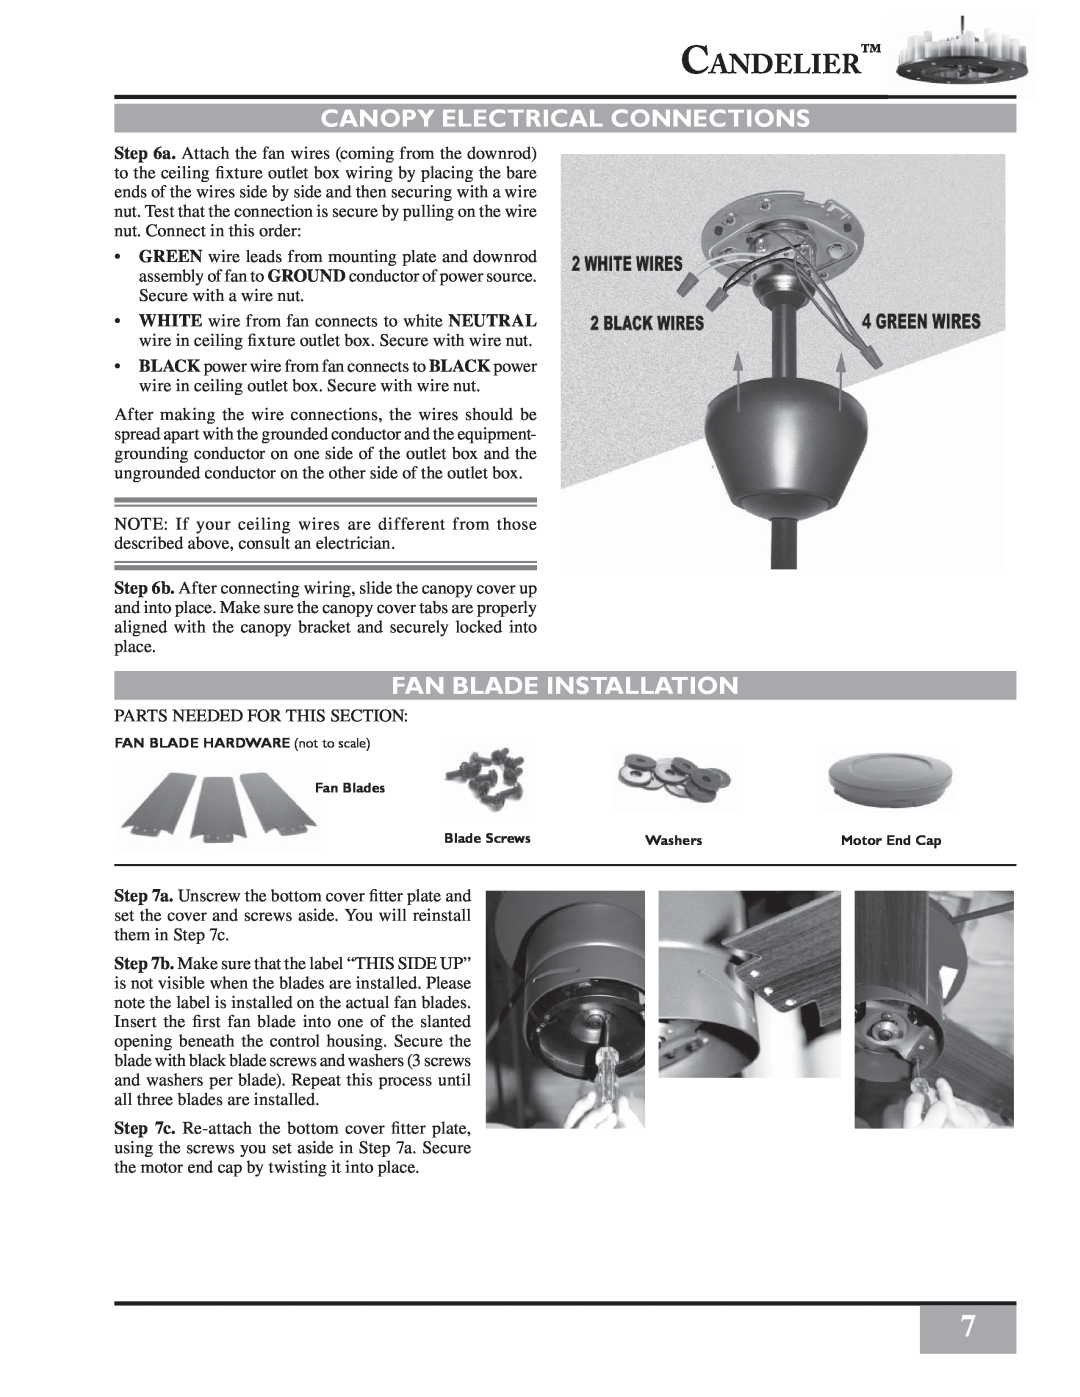 Casablanca Fan Company C16G73T owner manual Canopy Electrical Connections, Fan Blade Installation, Candelier 